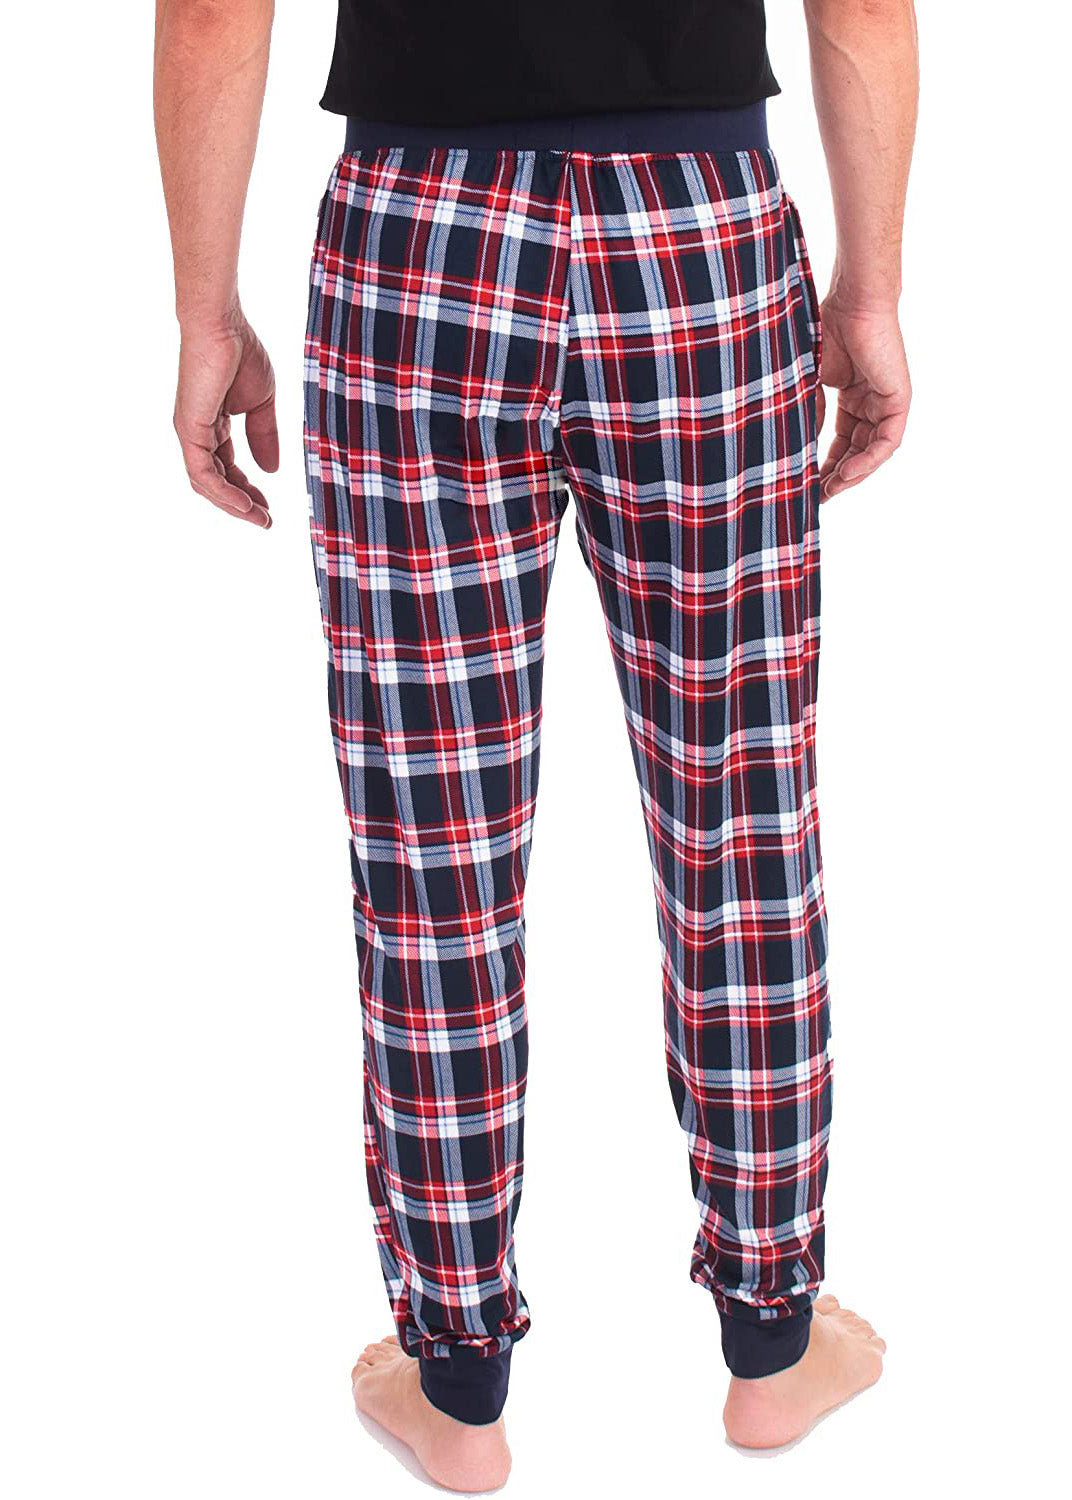 
                  
                    PJ joggers with soft velvety texture, stretch, elastic waistband, drawstring, and stylish ankle cuff. This pattern is a red, navy, white plaid. it has navy waist and drawstring. 
                  
                